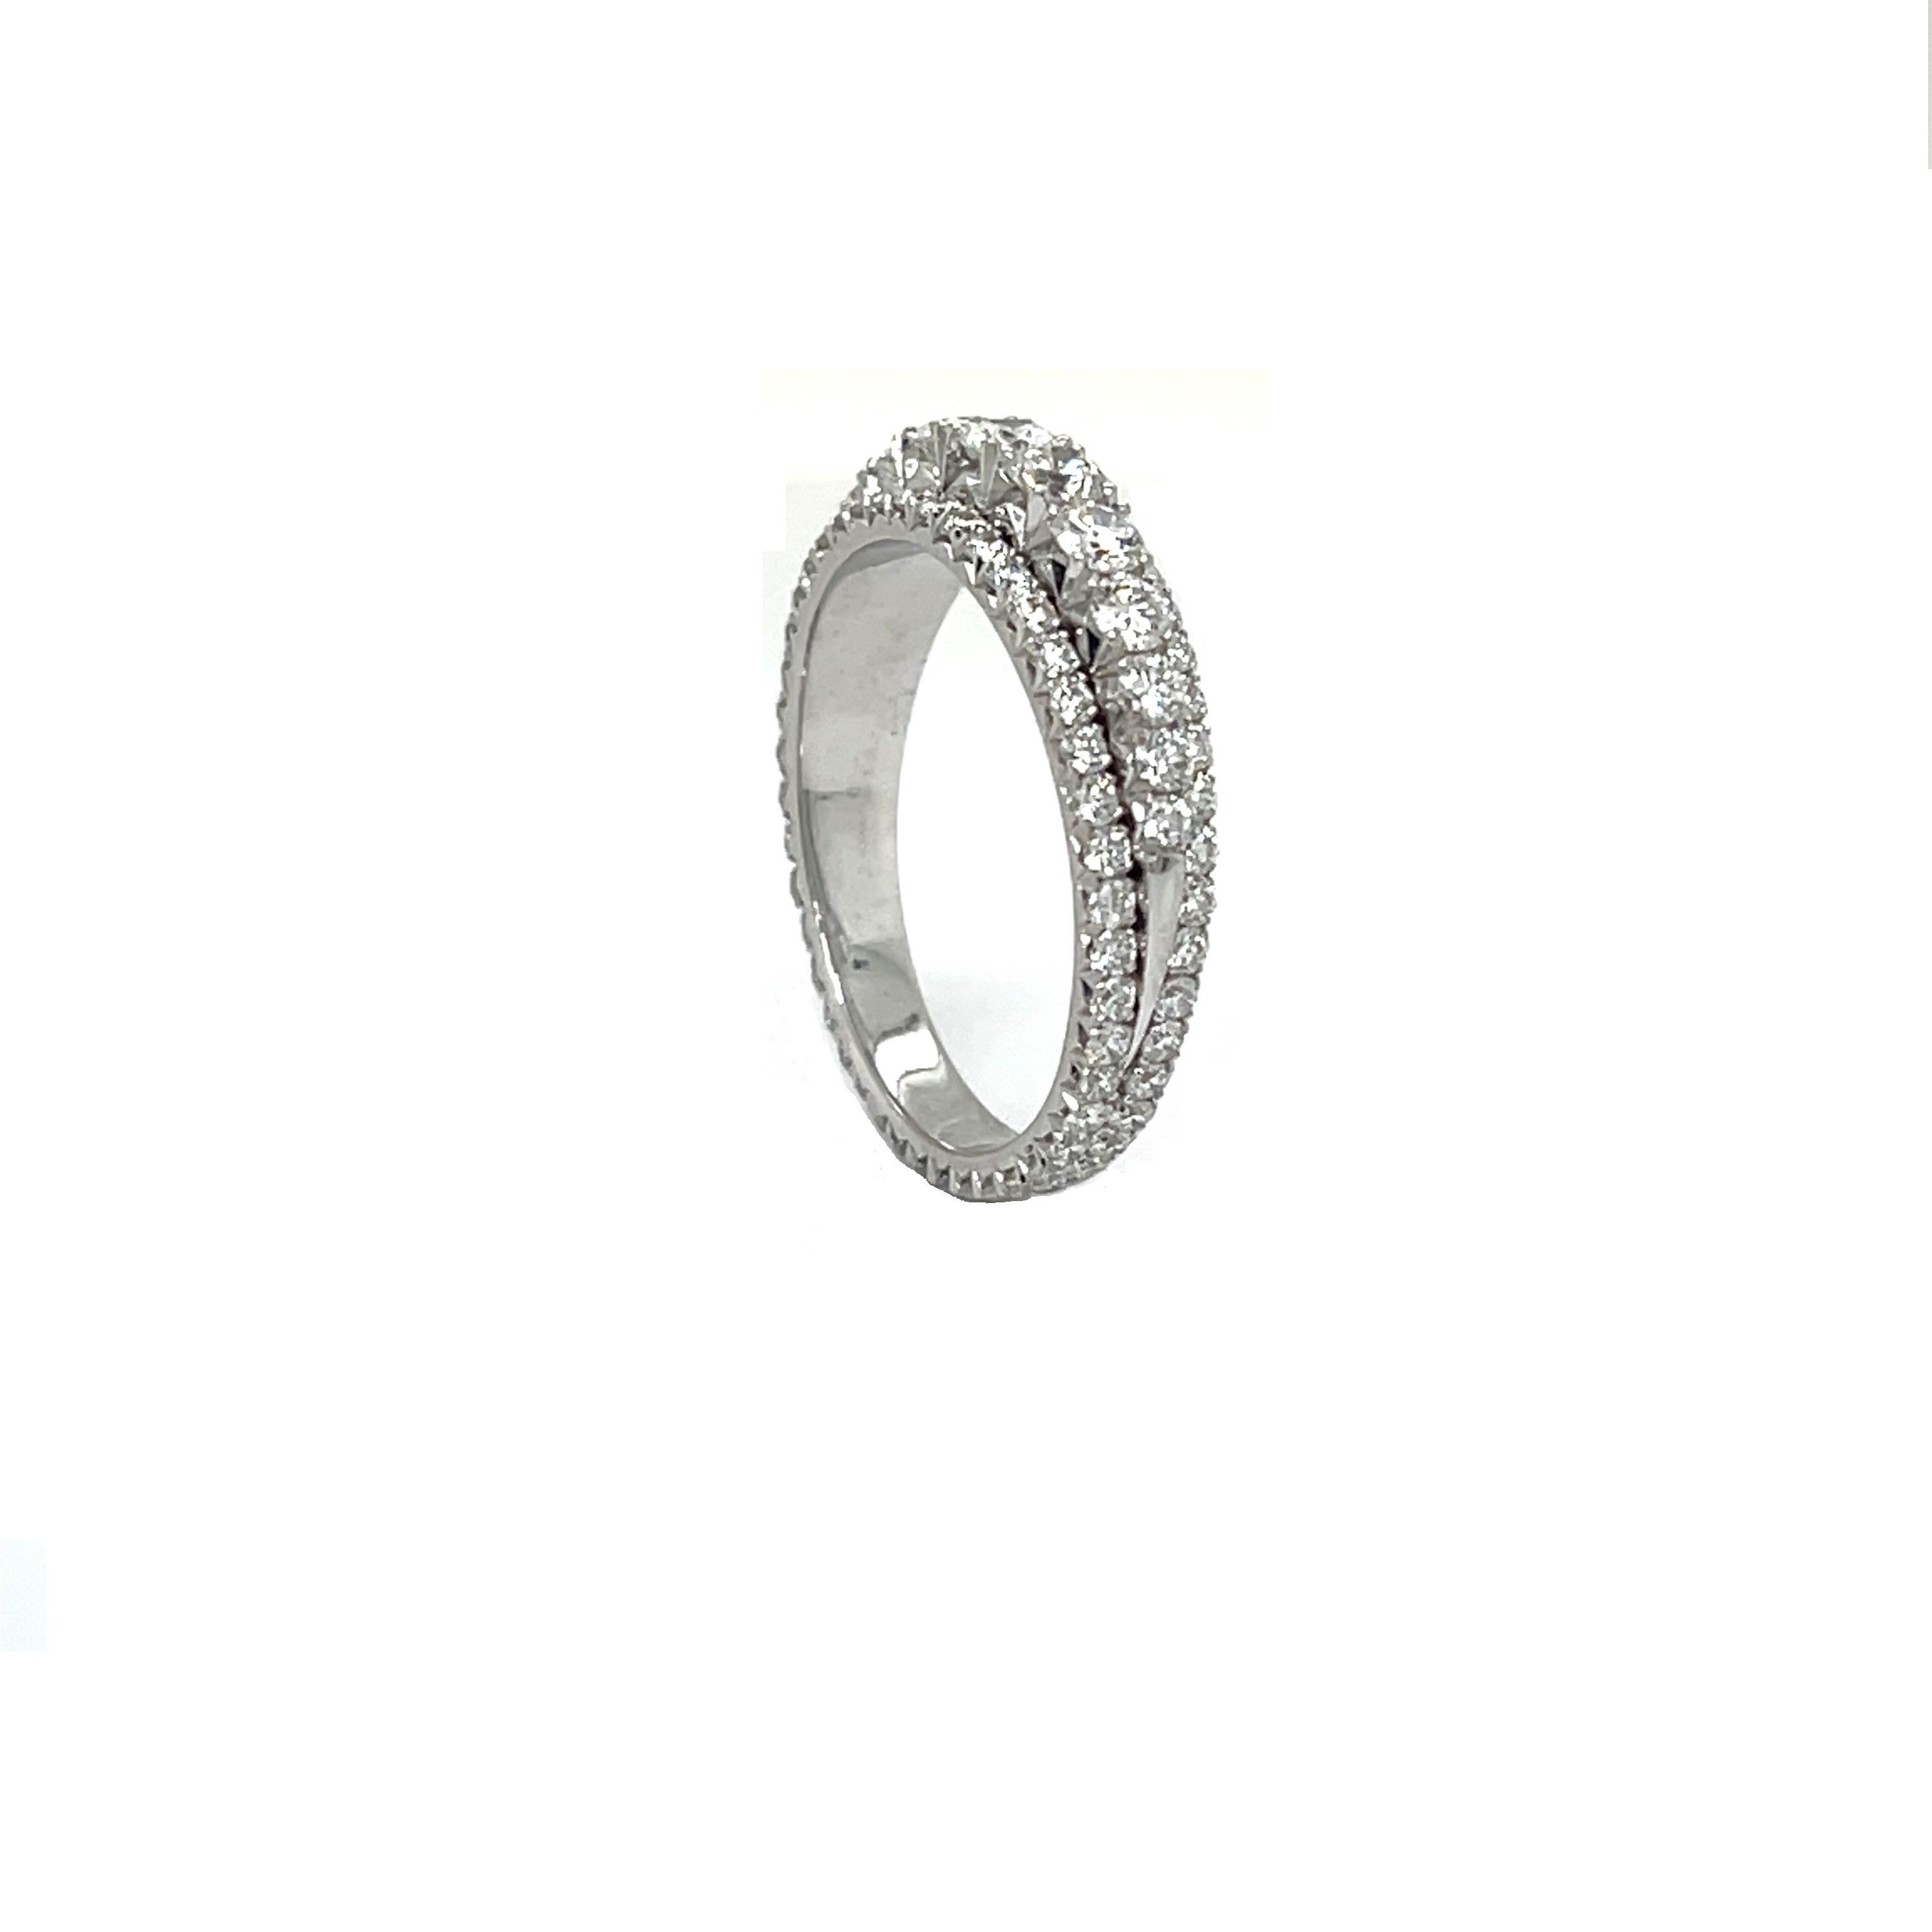 18K White 3 Piece Rings Set in Micro Pave Fish Tail 

Metal: 18K White Gold
Diamond Info: G VS, 101 Round Brilliant Diamonds 
Total Diamond Weight: 1.35 cwt.
Item Weight: 3.60 gm
Ring Size:  5.75 (Not re-sizable)
Measurement: 5.3 mm width
